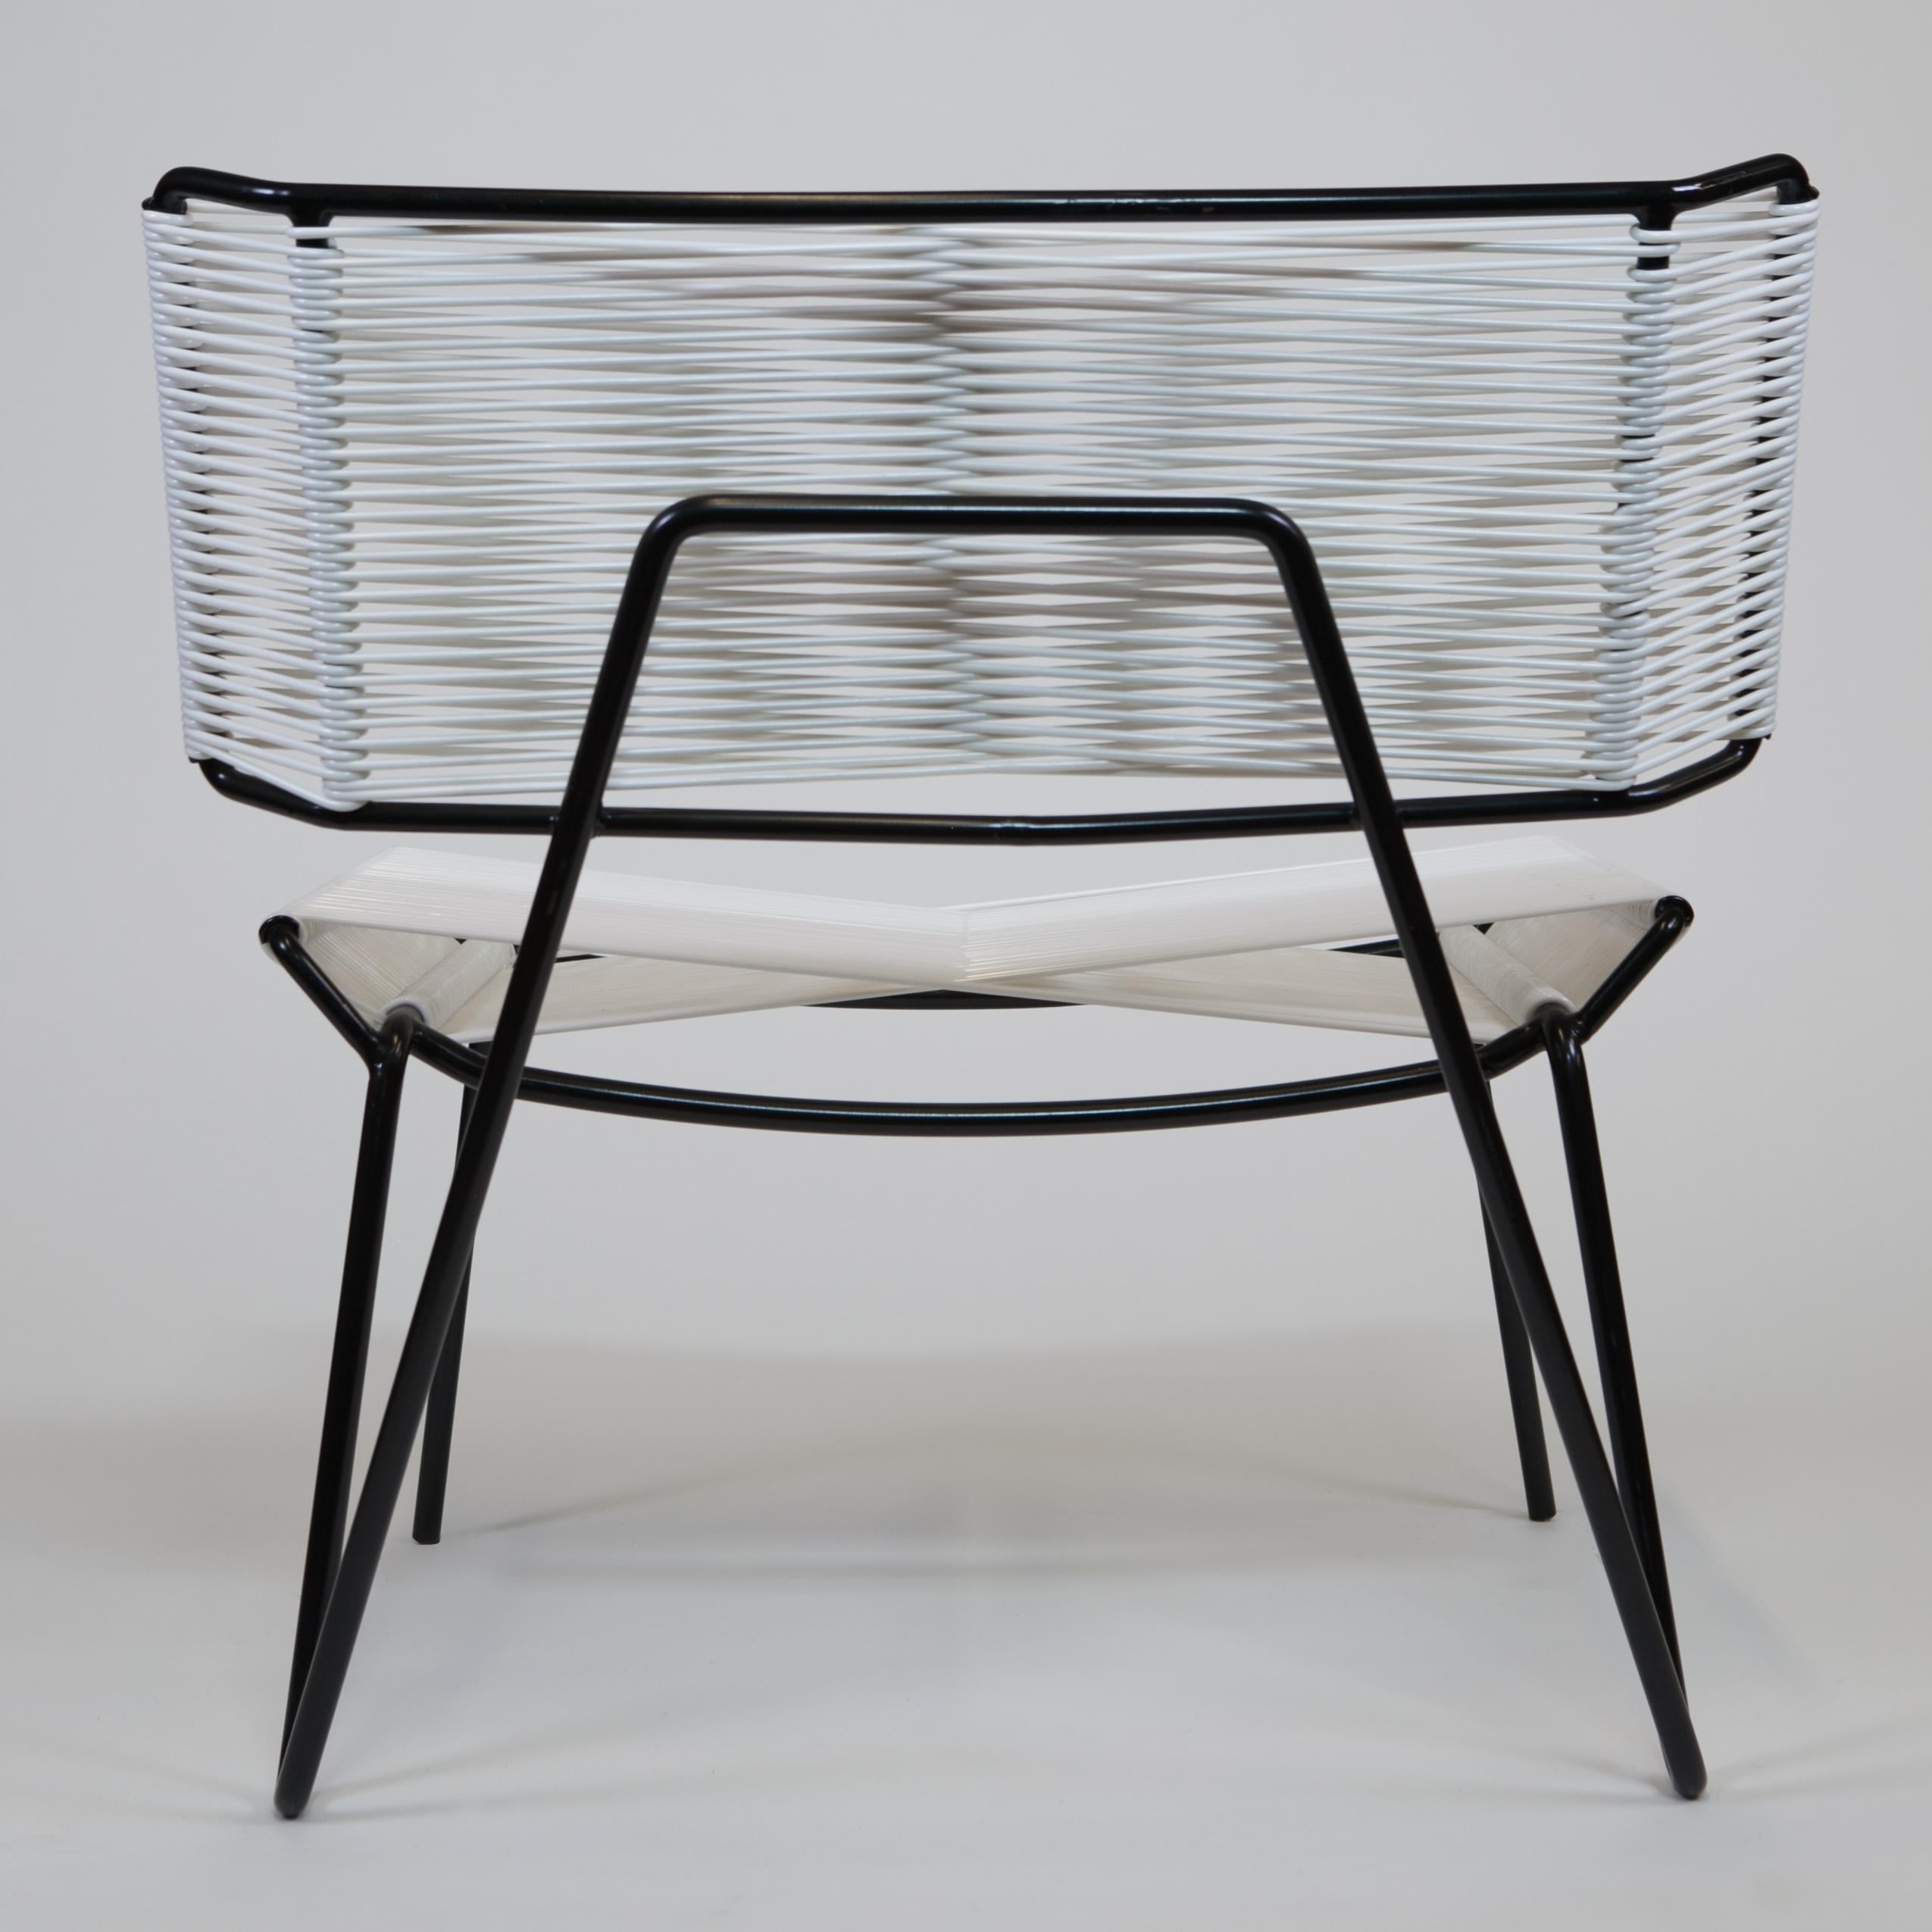 Hand-Woven Handmade Midcentury Style Outdoor Lounge Chair, Black with White PVC, in Stock